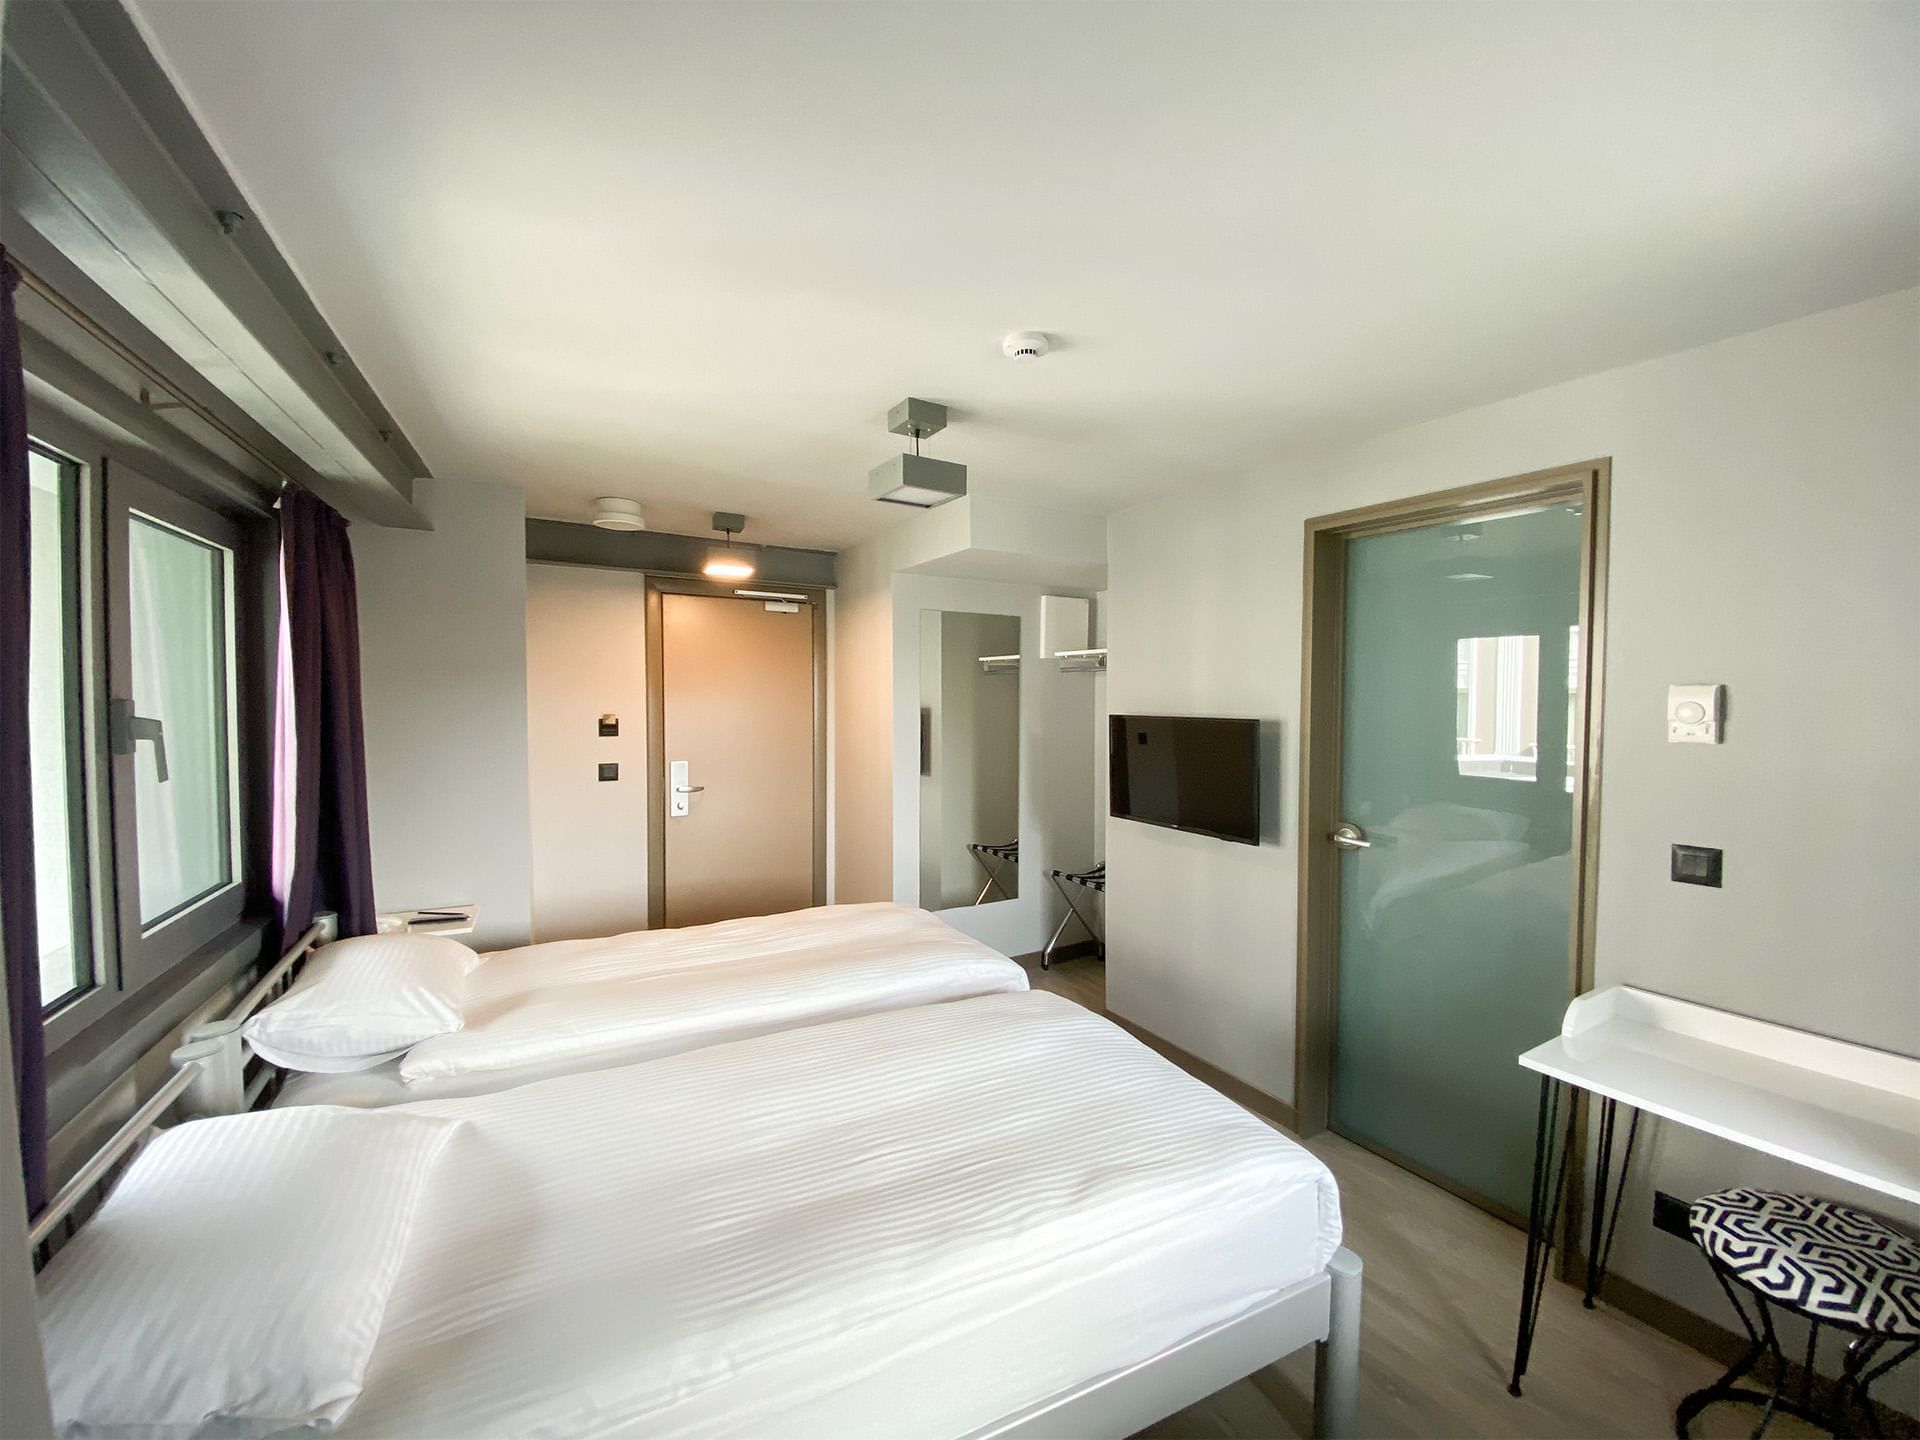 Interior of a Standard Twin room at  Eresin Hotels Express